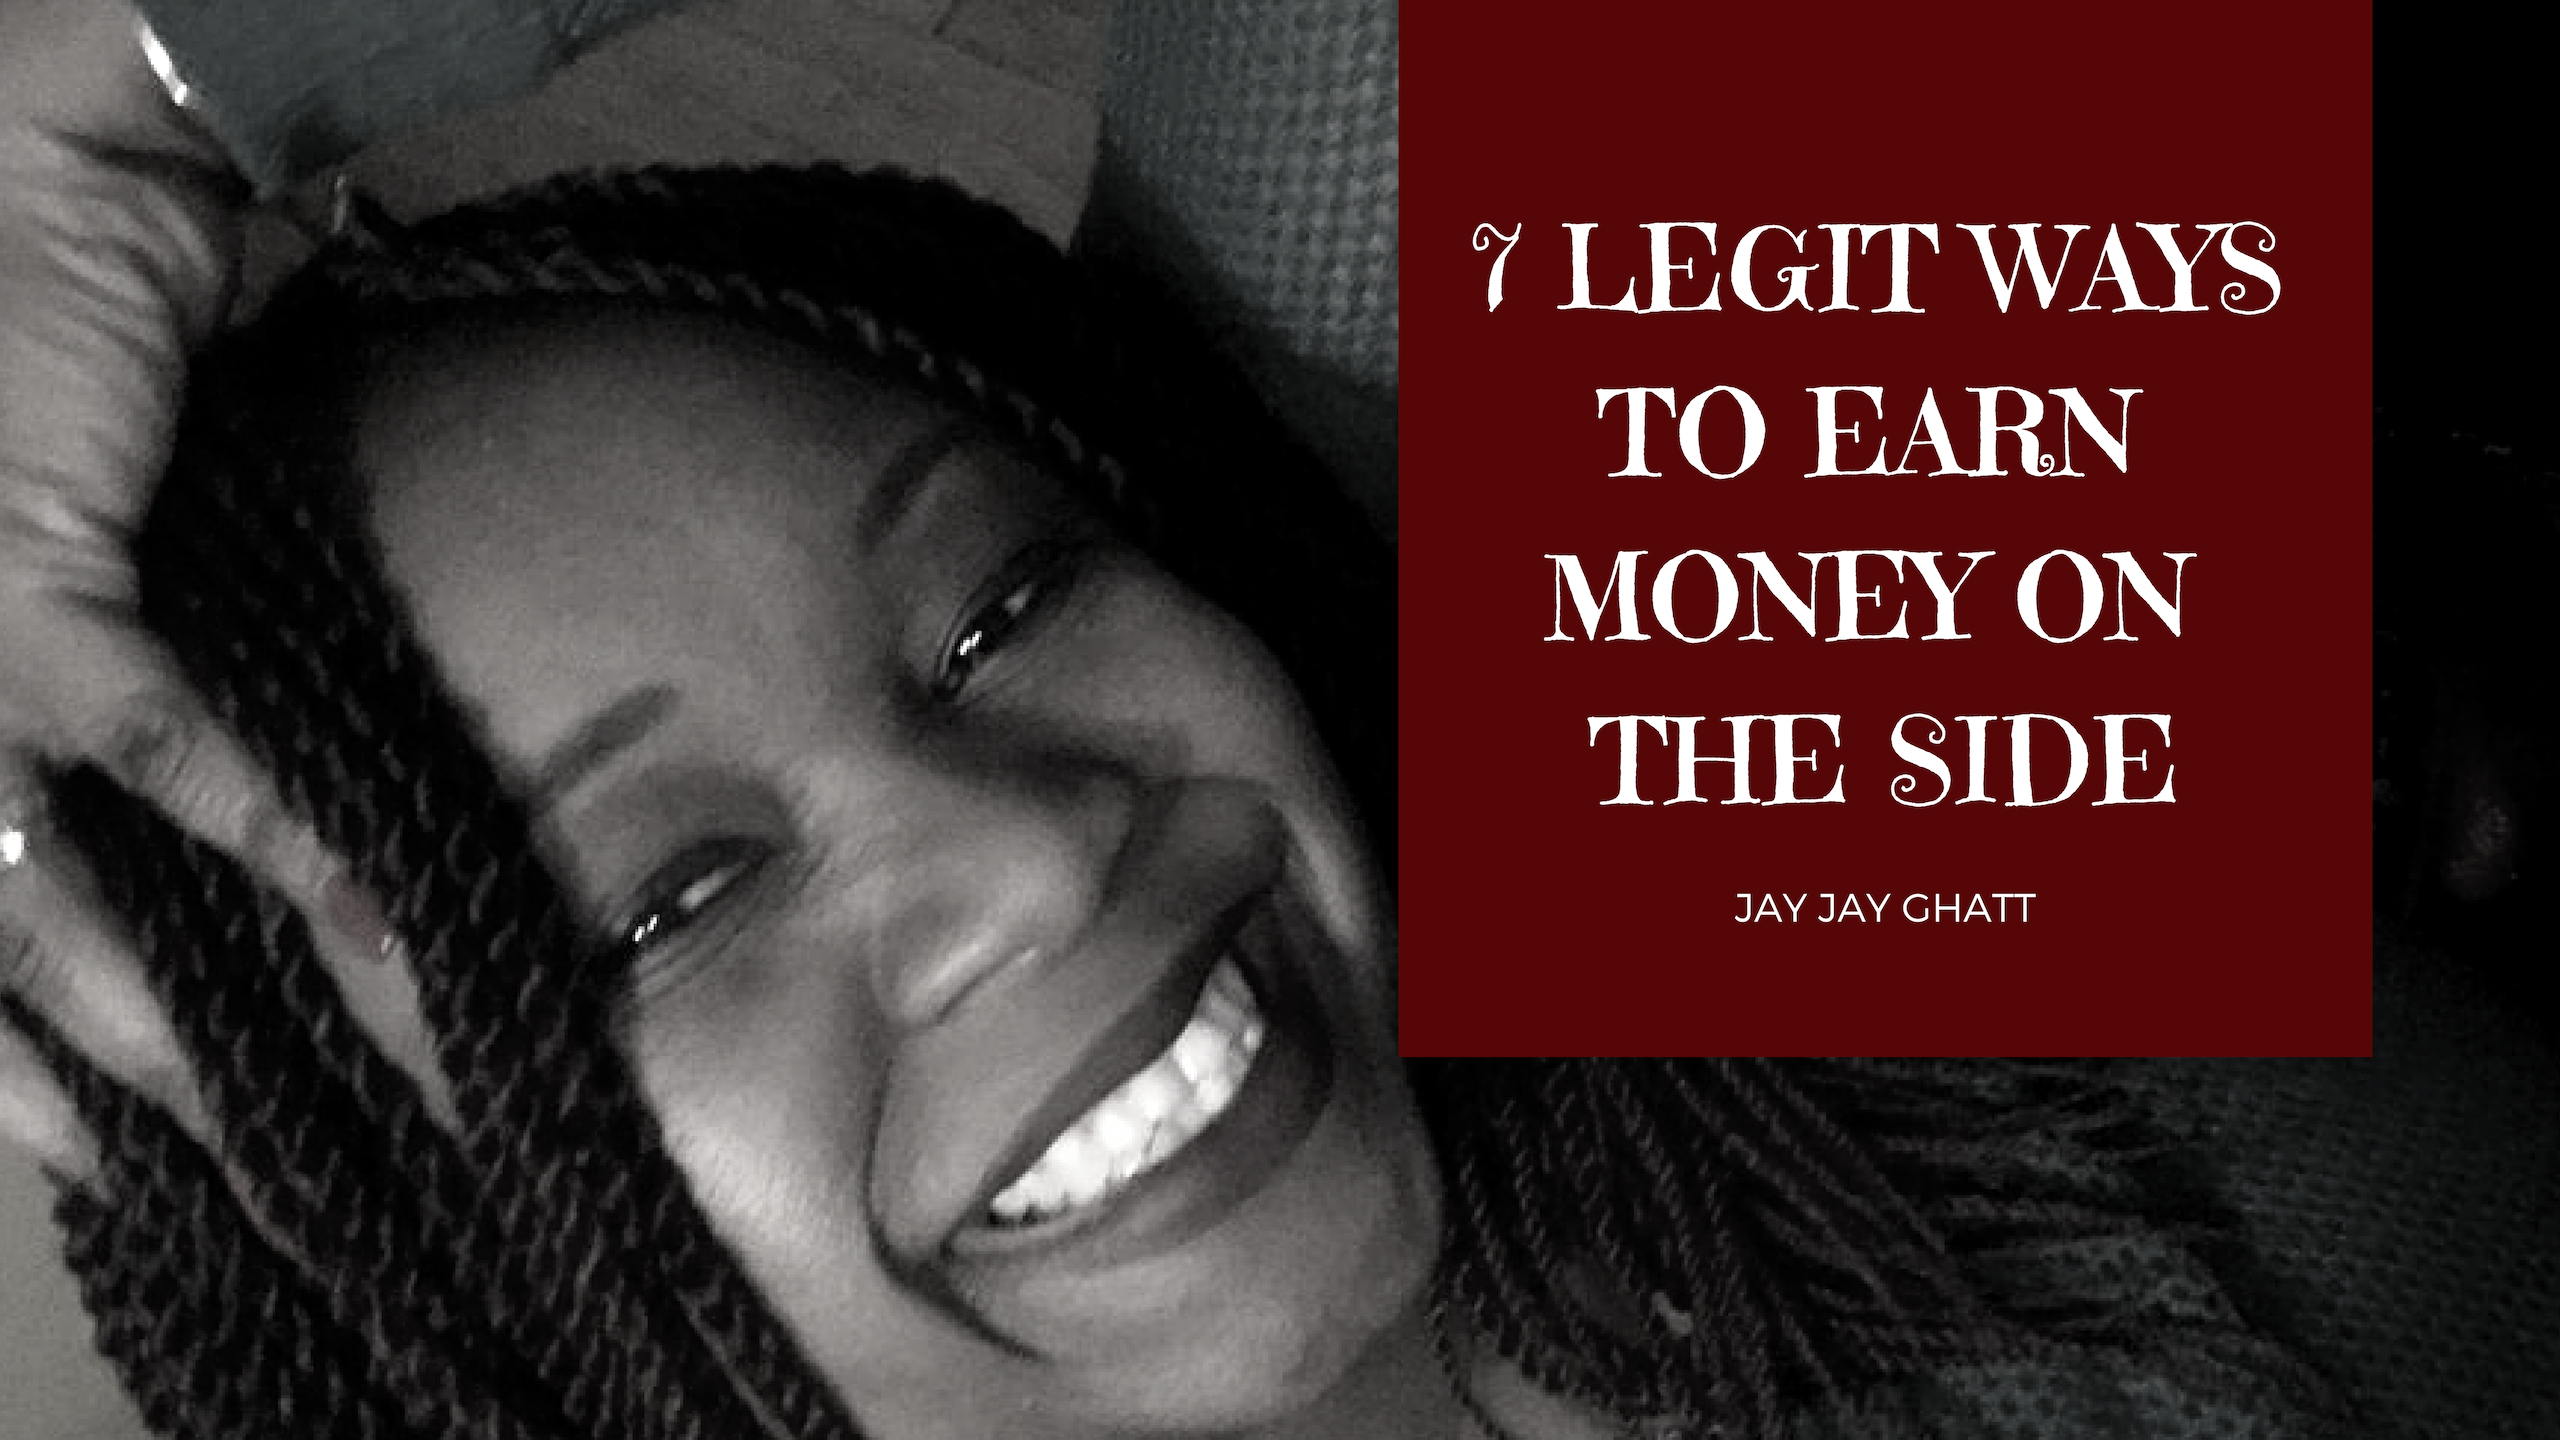 Just Released: 7 Legit Ways to Earn Money On the Side {Video}